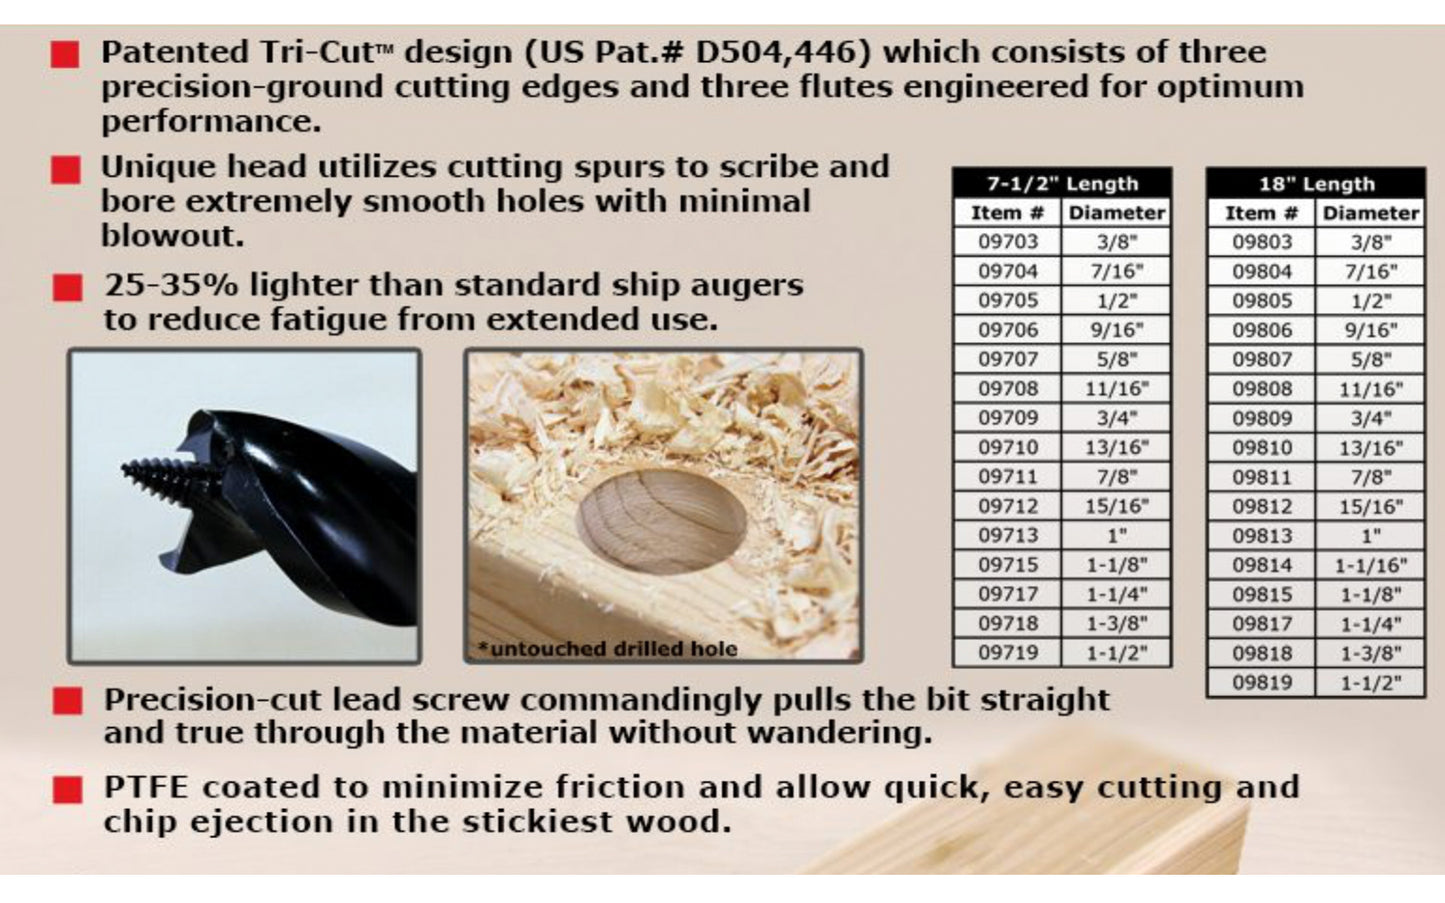 Wood Owl Tri-Cut Ultra Smooth Auger Bit ~ 18" Length - Made in Japan - Tri-Cut design which consists of three precision-ground cutting edges & three flutes engineered for optimum performance - cutting spurs to scribe & bore extremely smooth holes